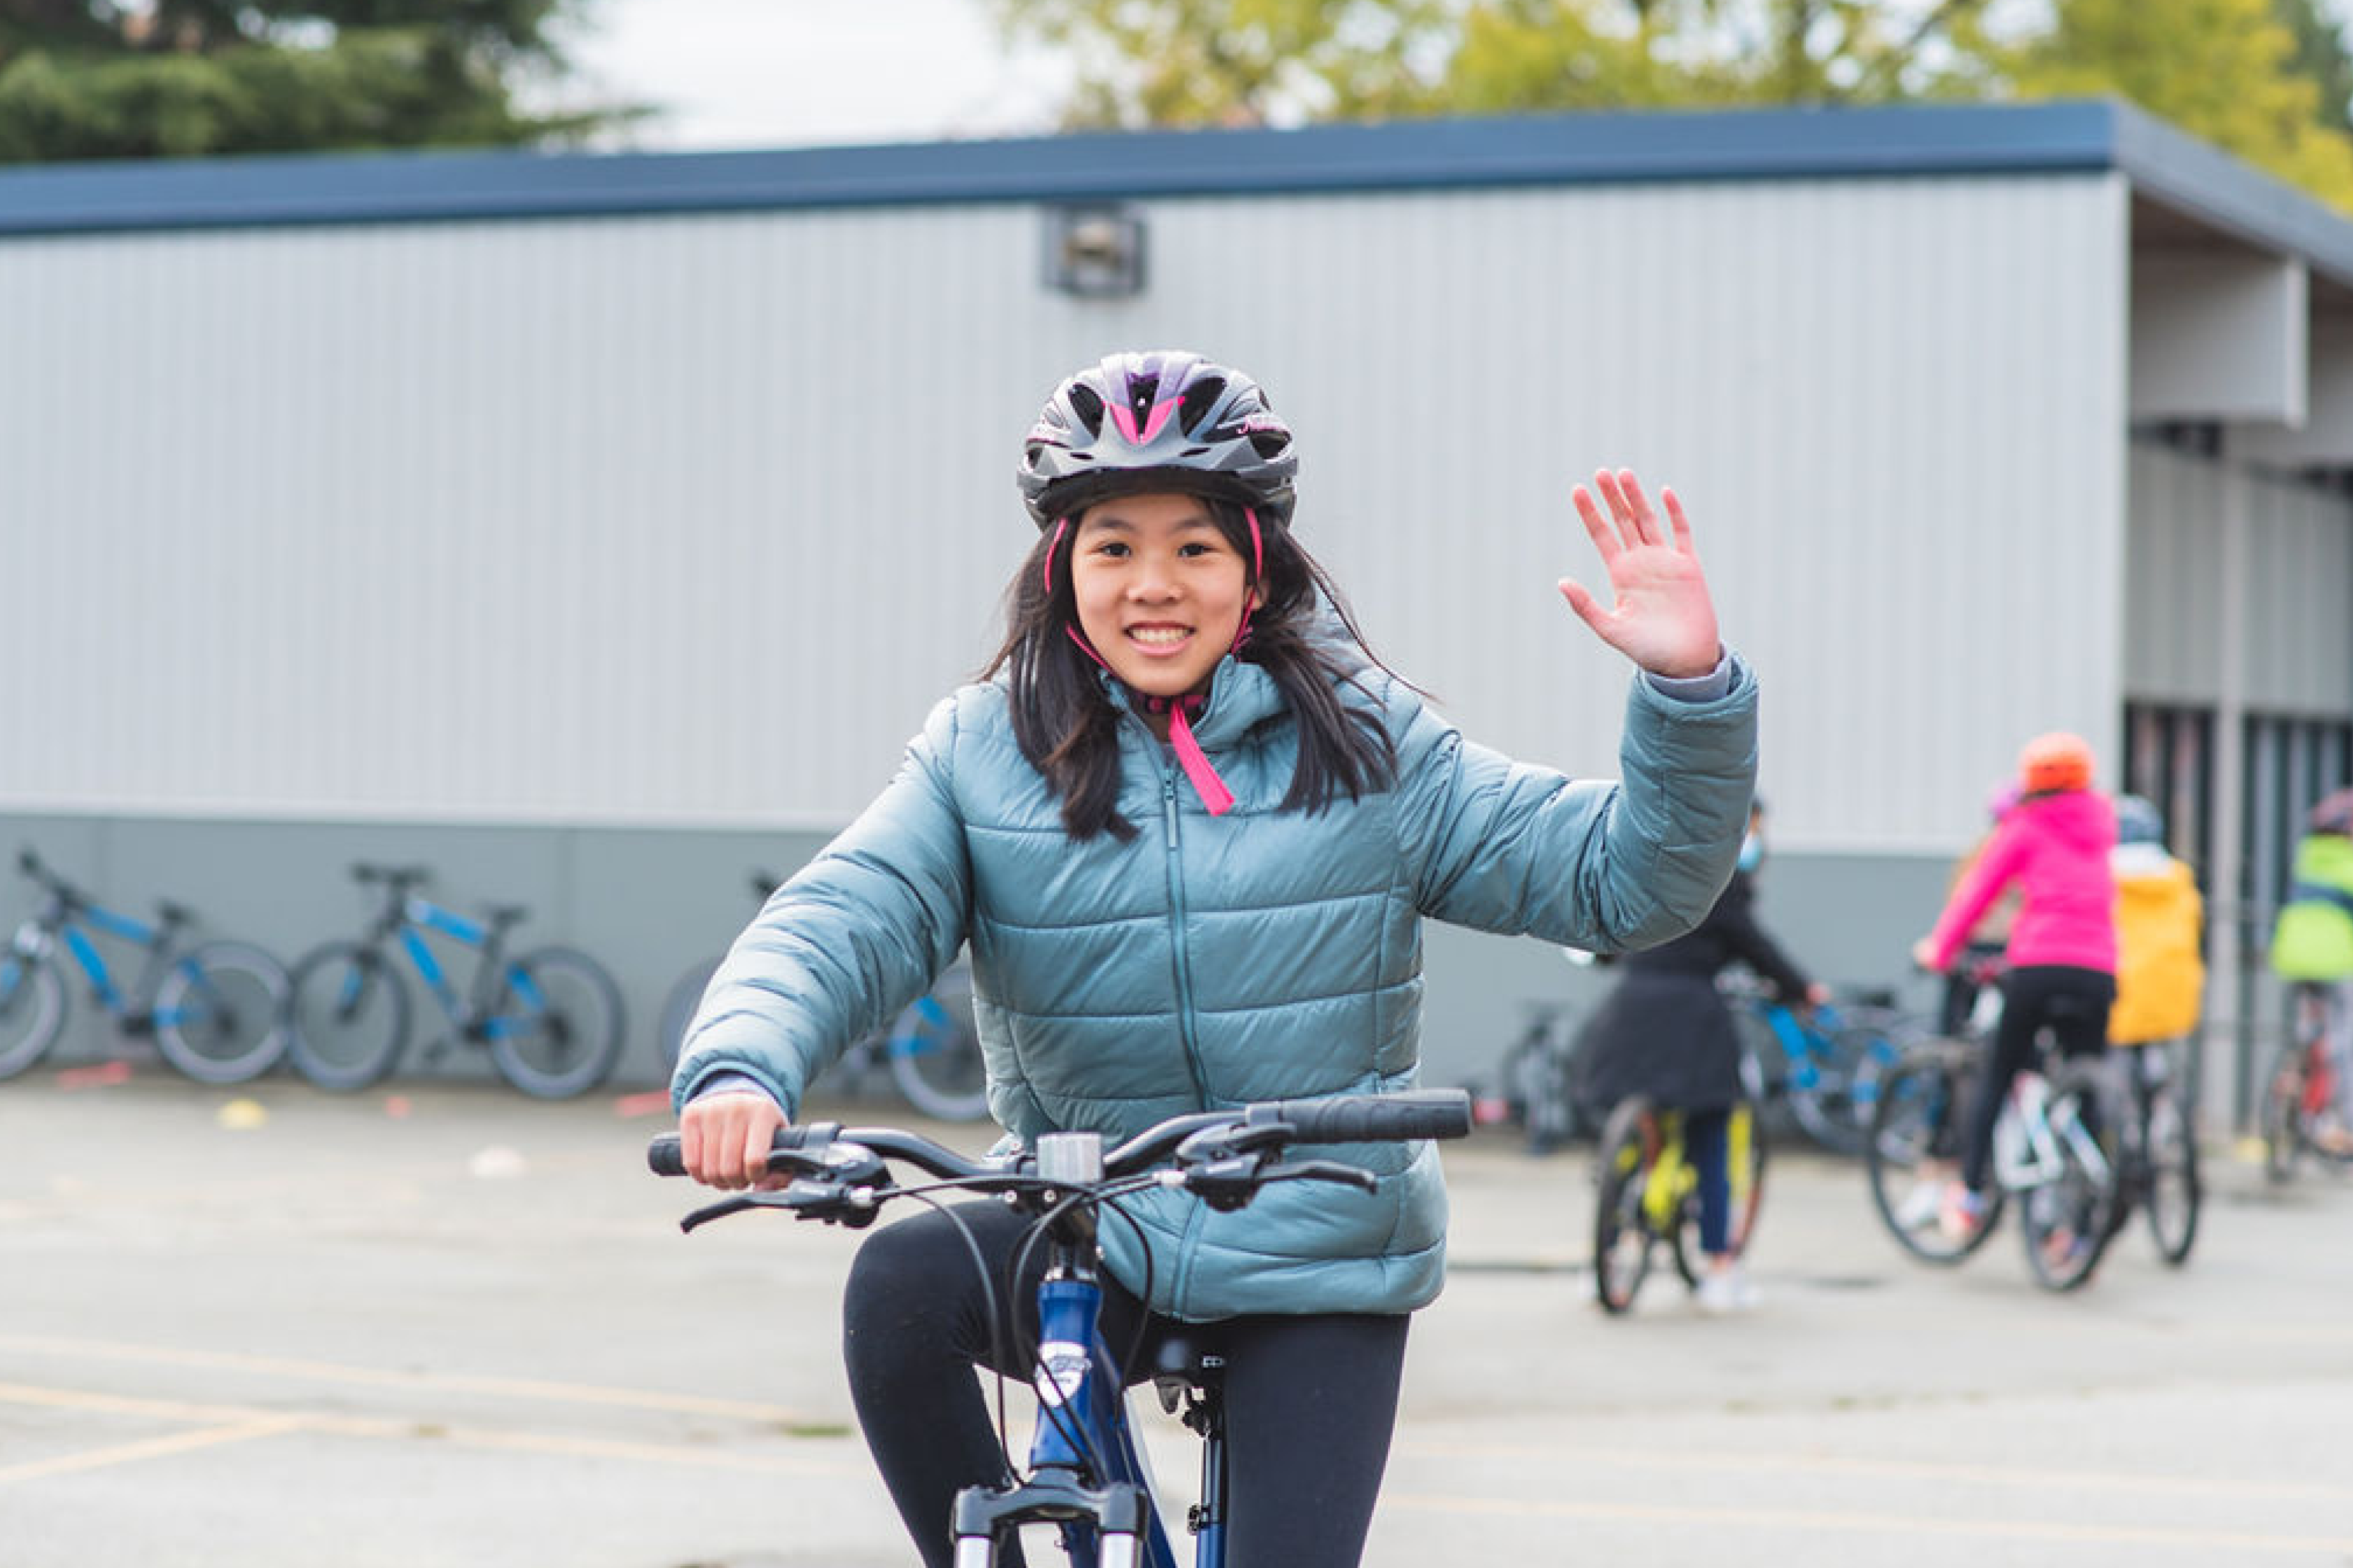 A young girl rides her bike on school grounds.